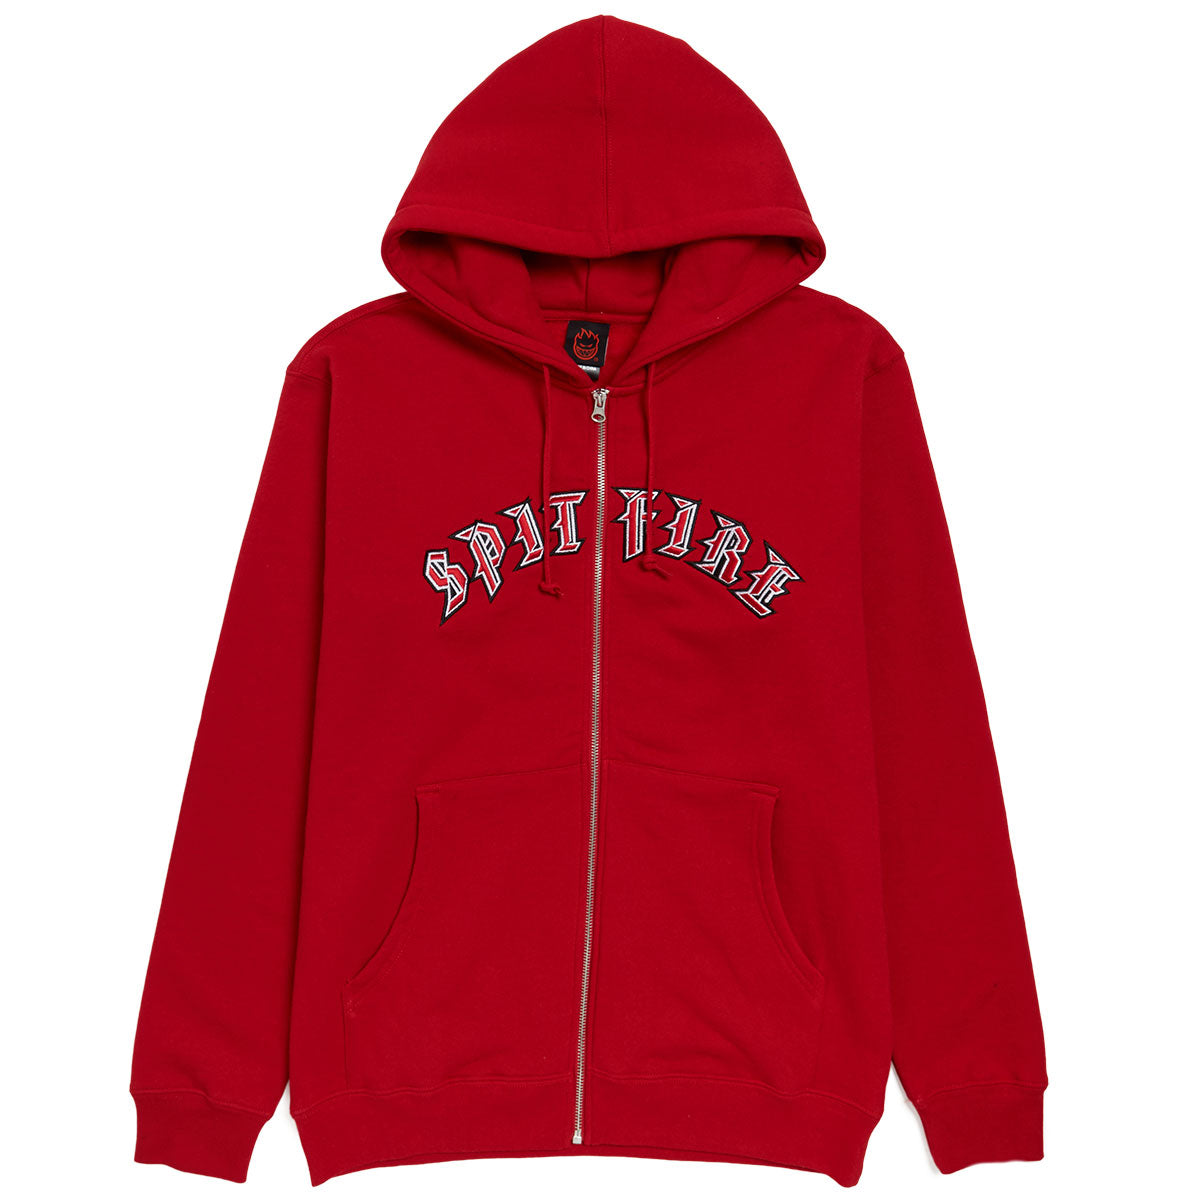 Spitfire Old E Emb Zip Hoodie - Red/Black/Red/White image 1